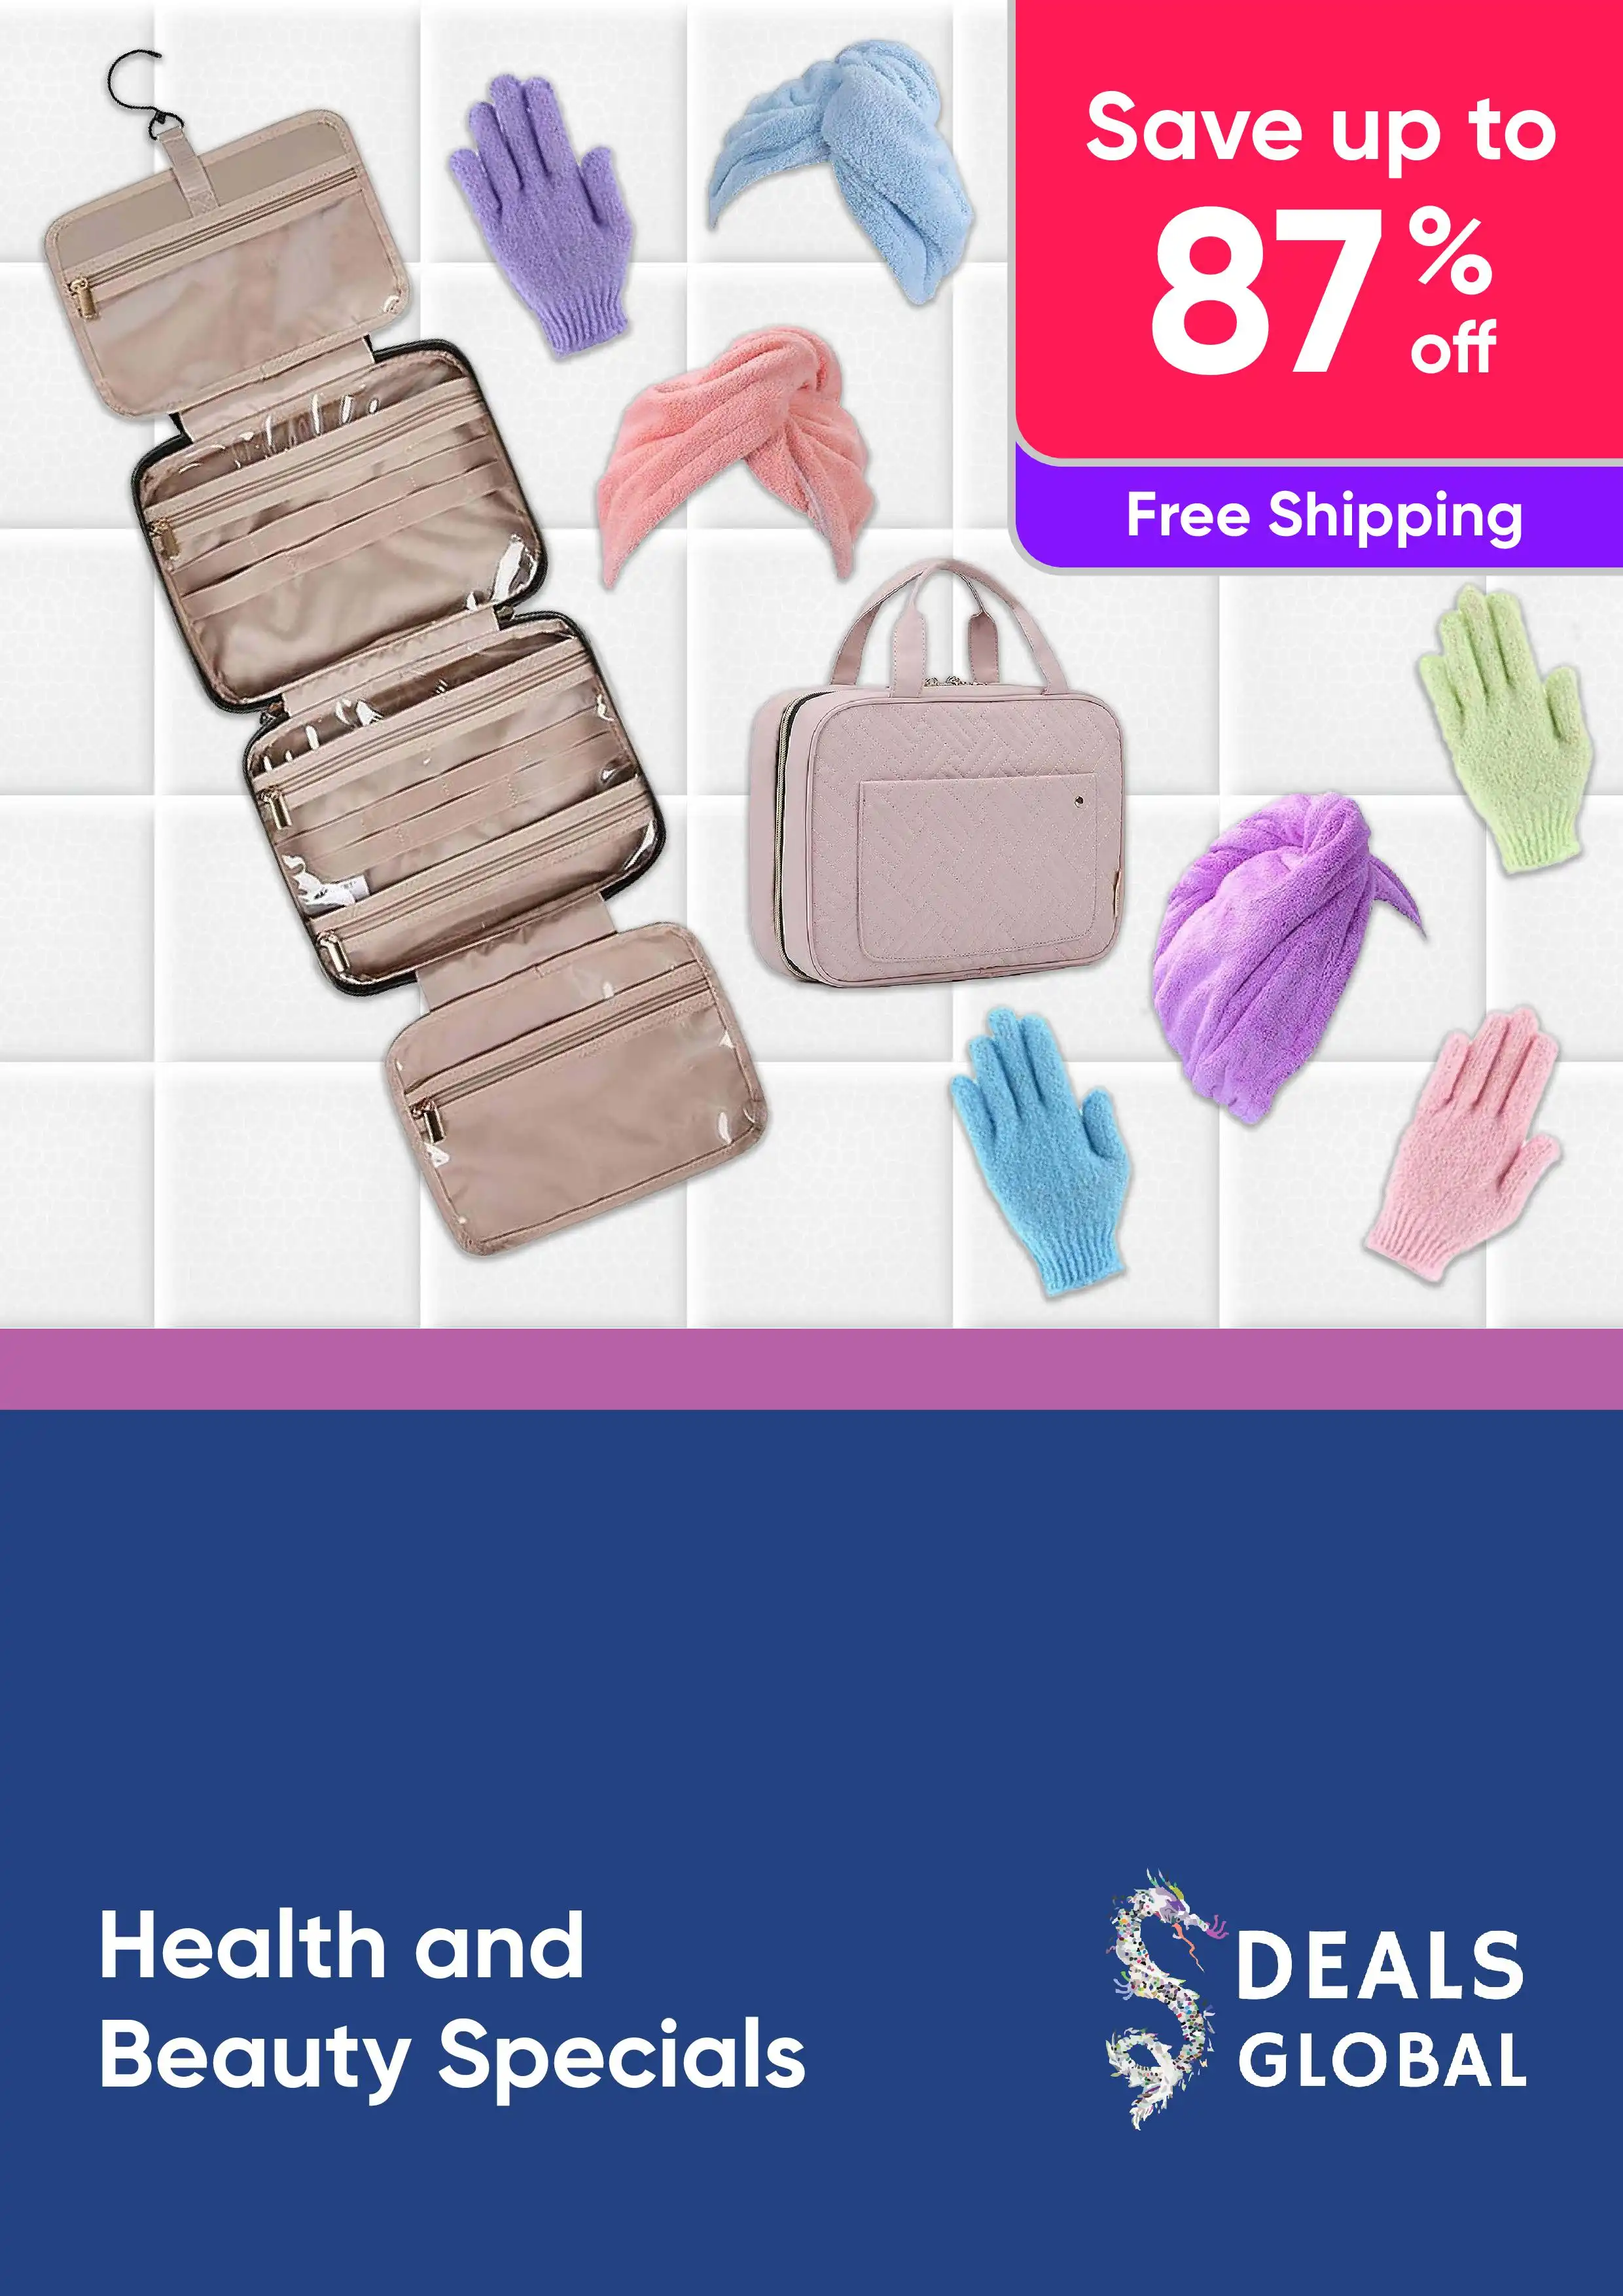 Health and Beauty Specials - Save Up to 87% Off On a Range of Hair and Body Tools